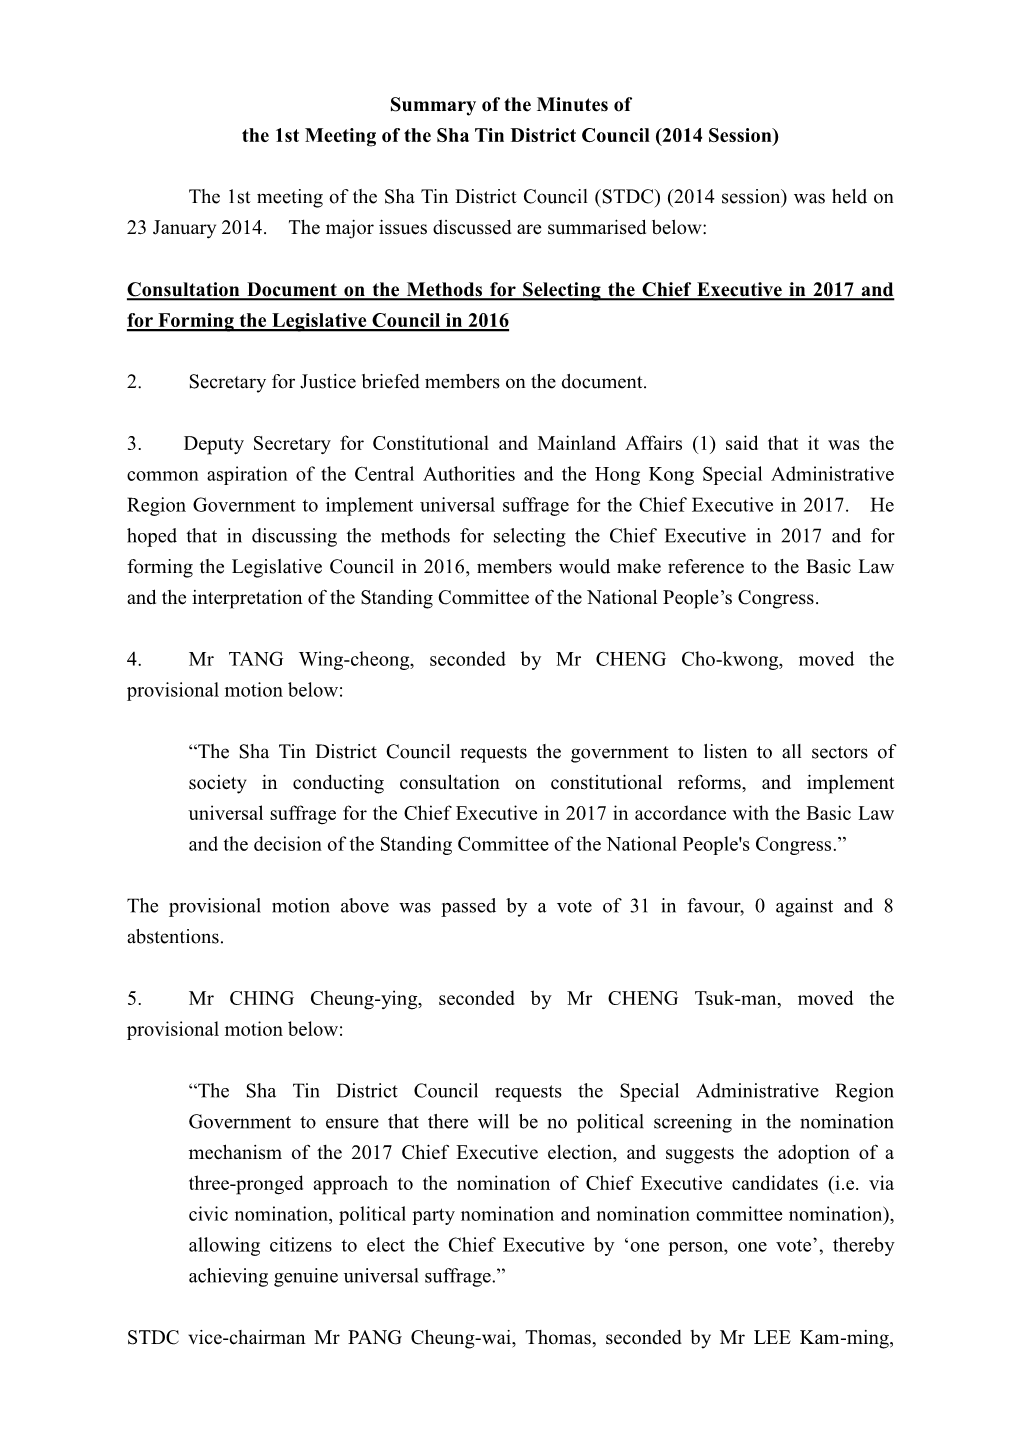 Summary of the Minutes of the 1St Meeting of the Sha Tin District Council (2014 Session)